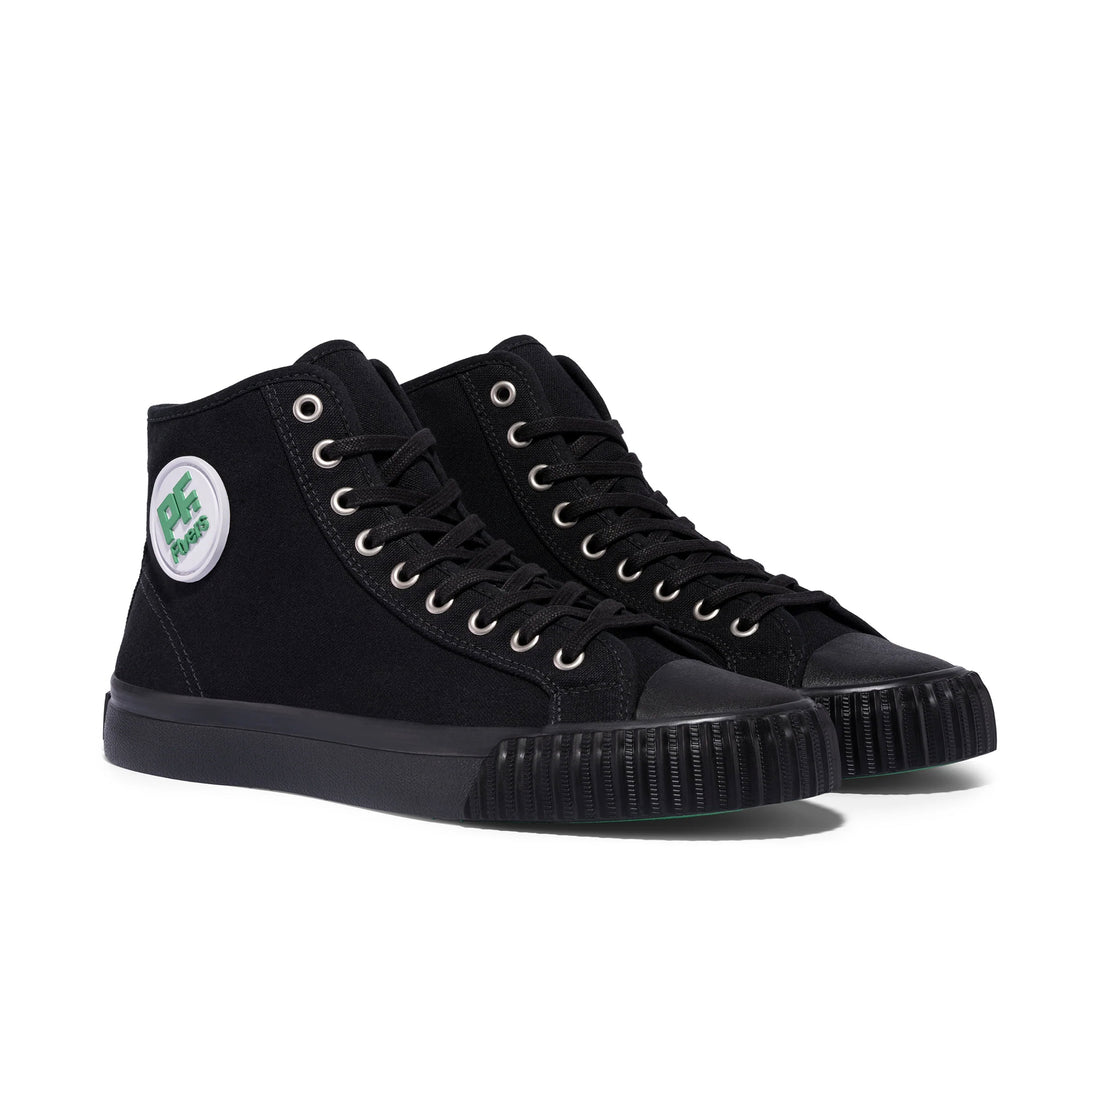 Celebrating 30 Years of the 1993 – PF. Flyers